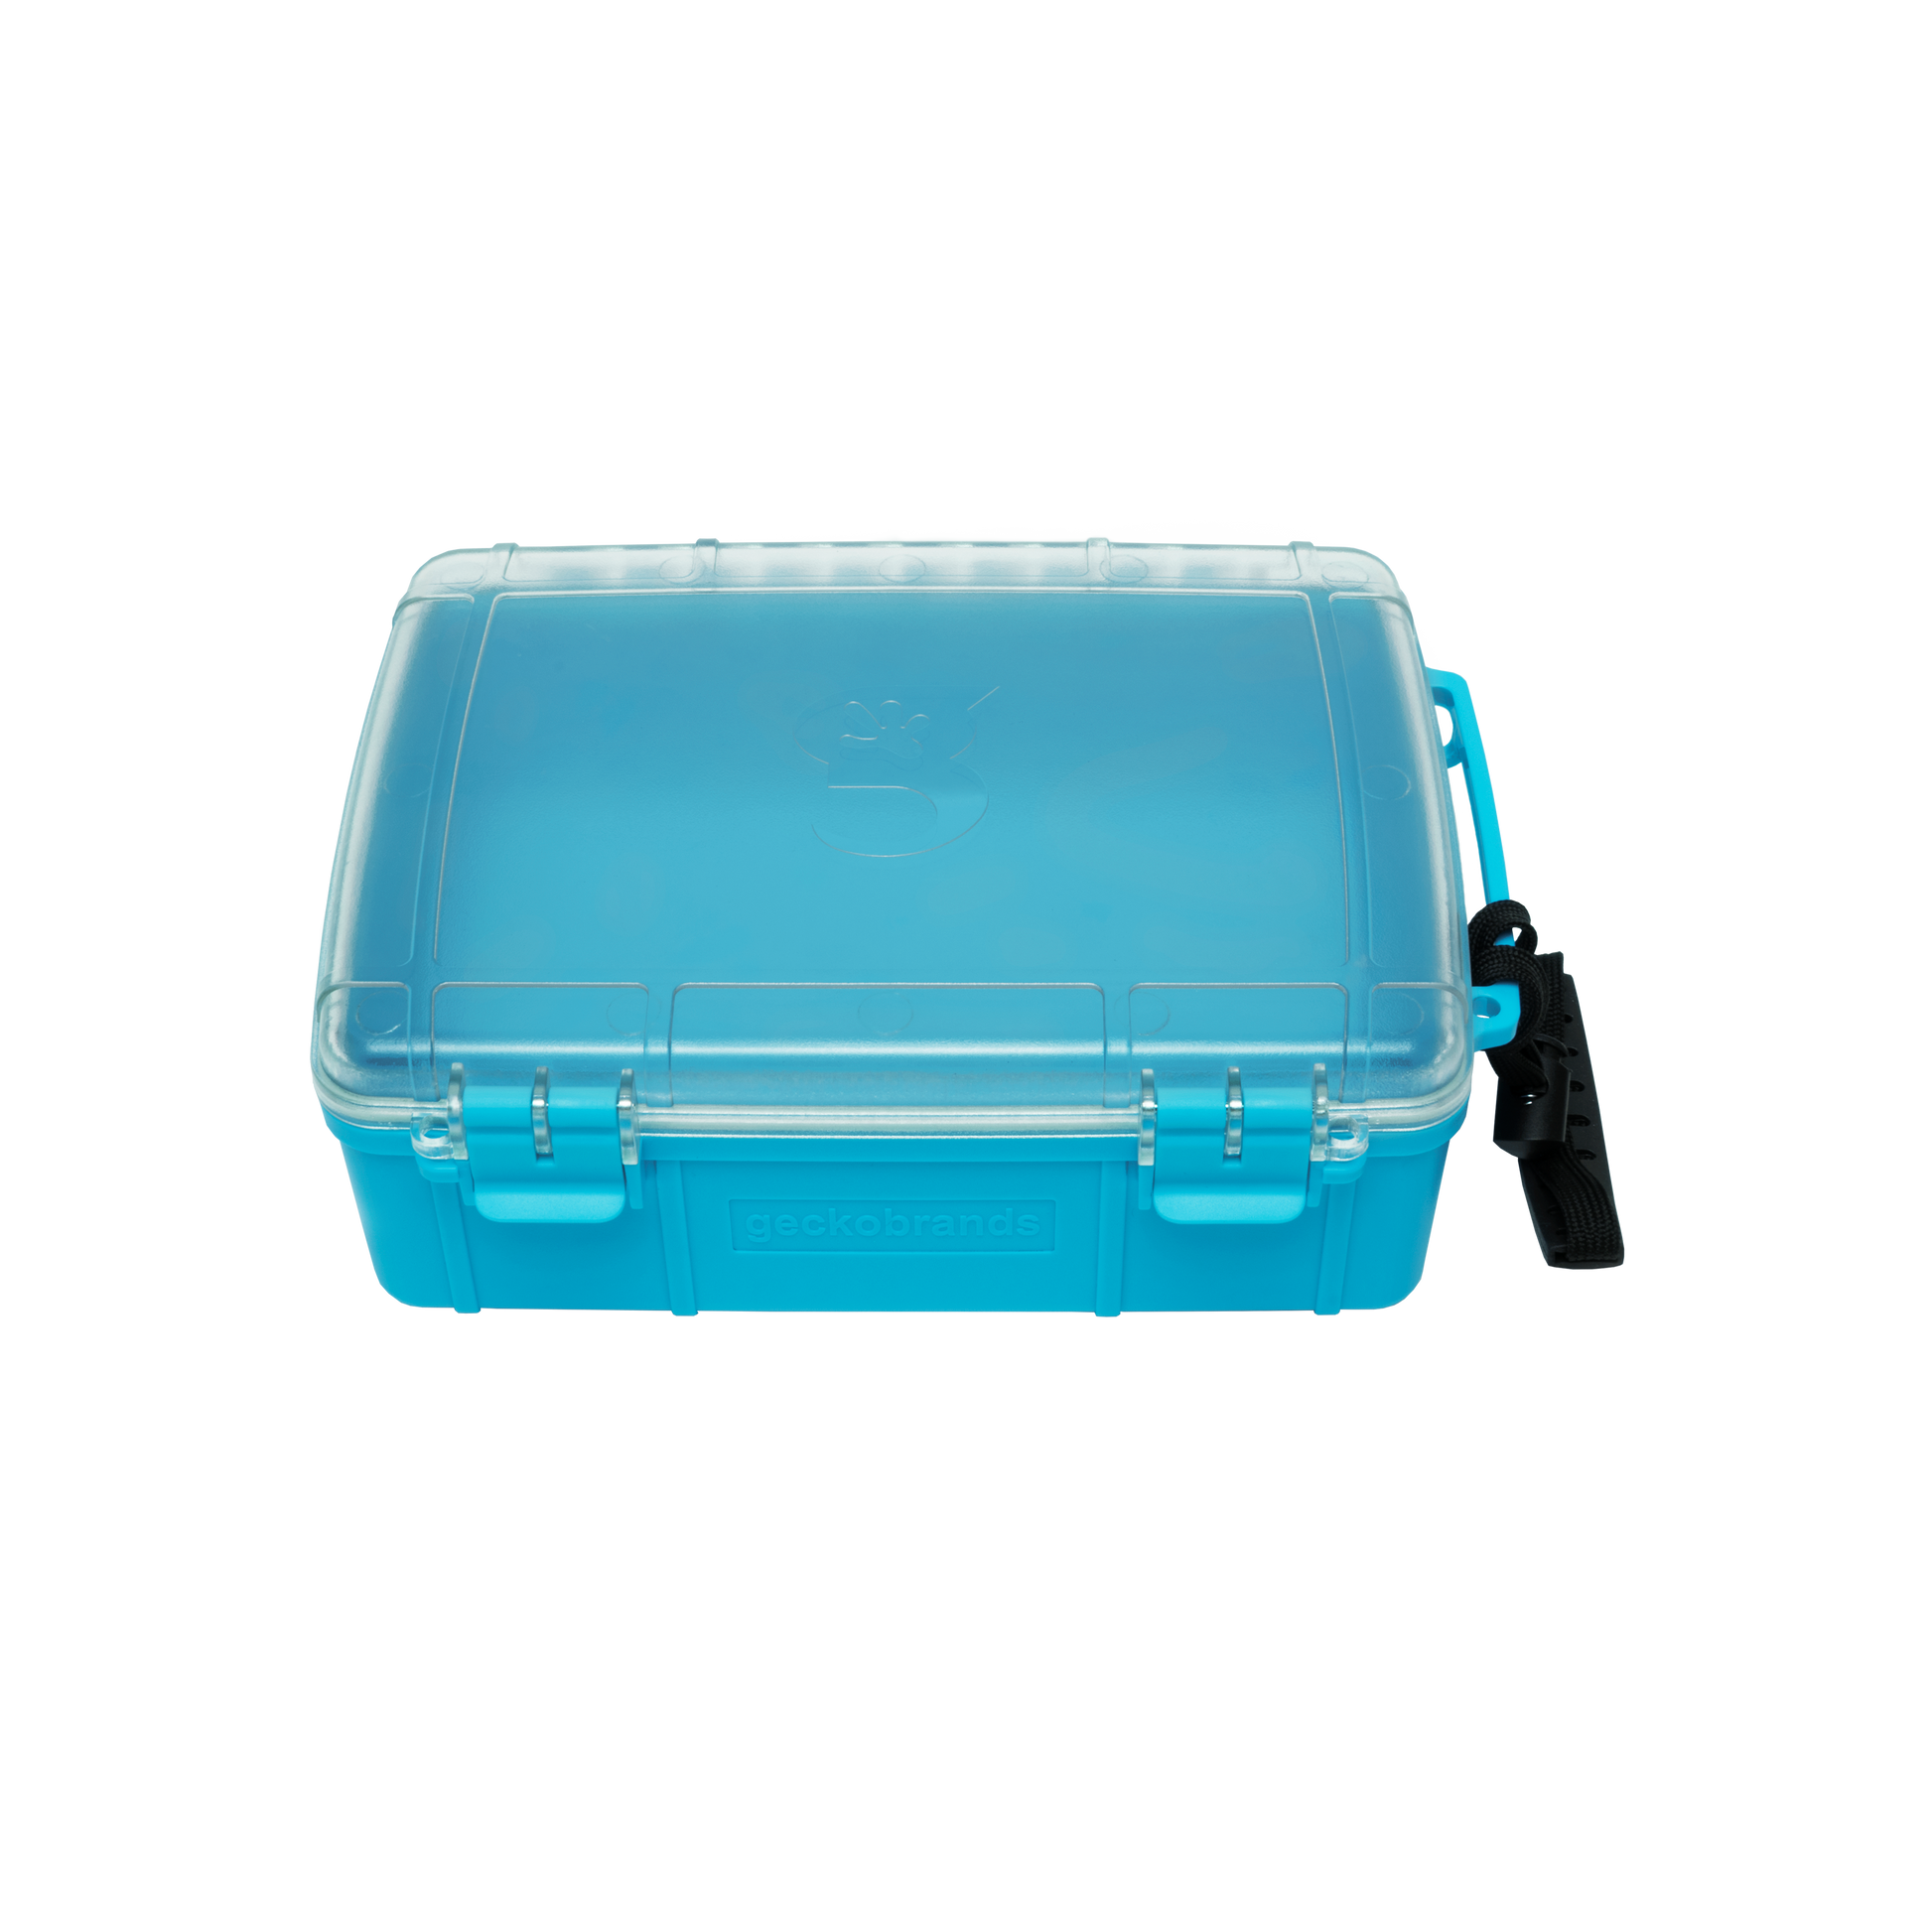 Outdoor Products Large Watertight Box, Charcoal